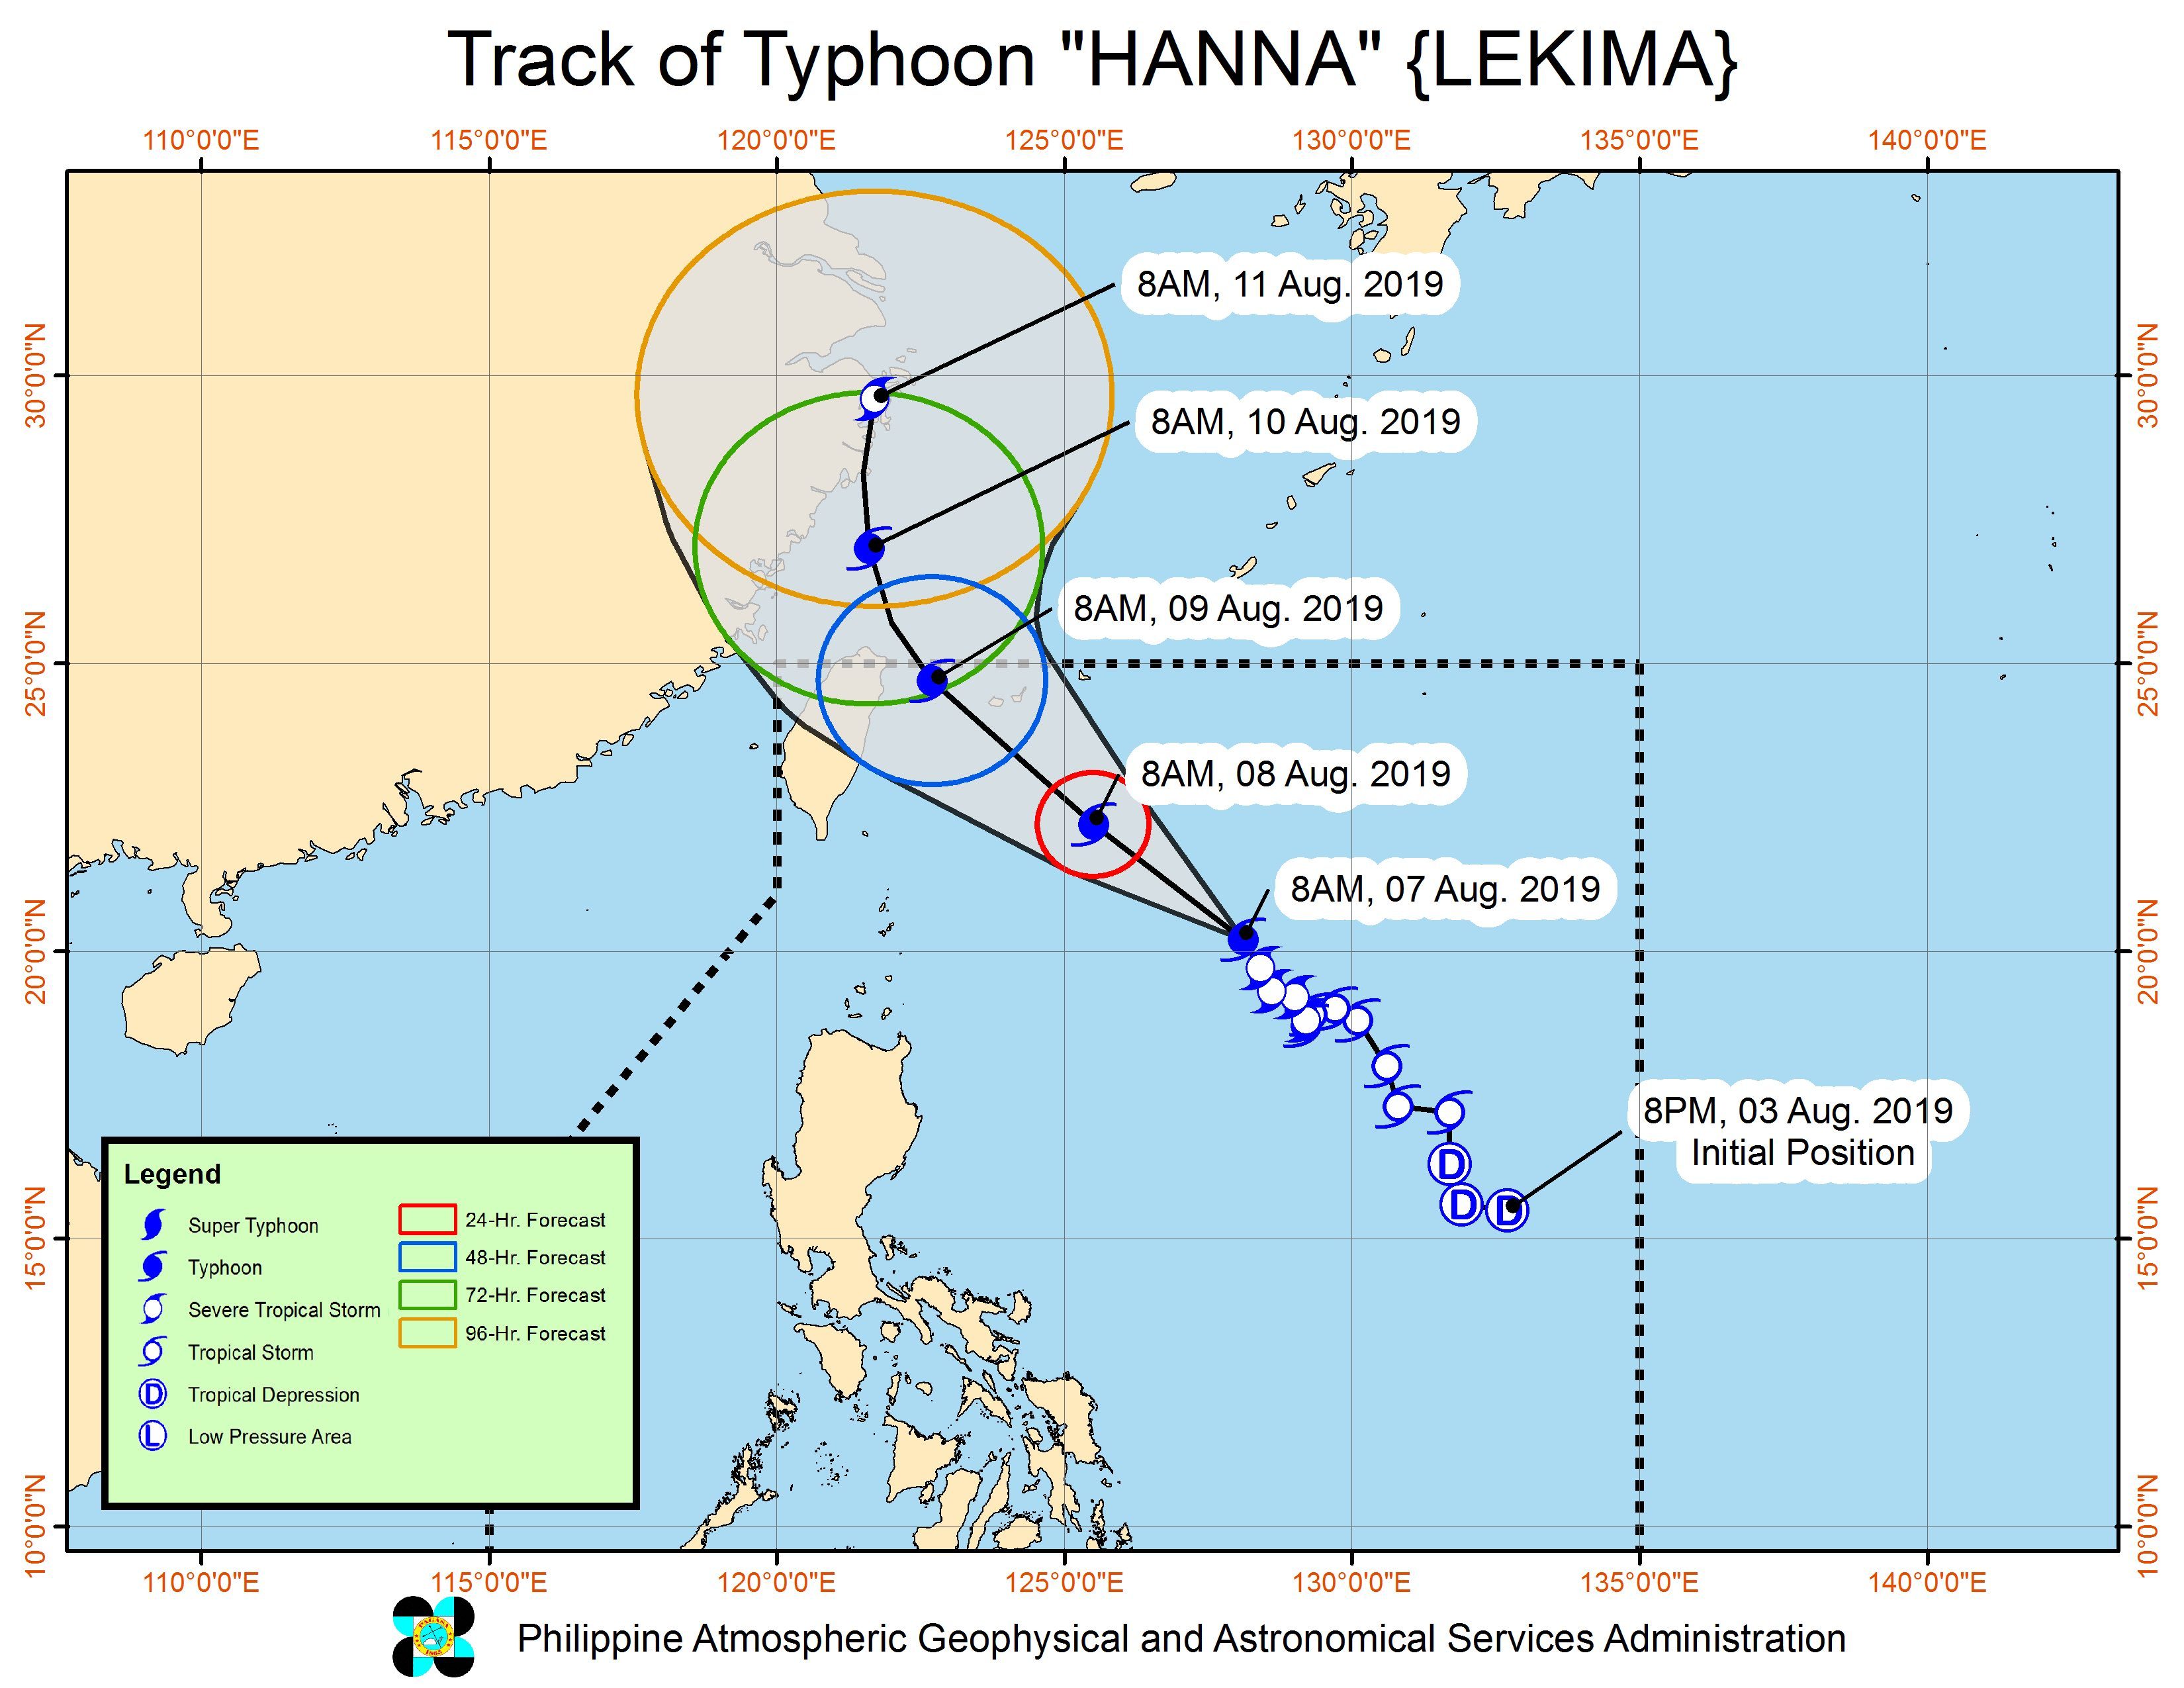 Forecast track of Typhoon Hanna (Lekima) as of August 7, 2019, 11 am. Image from PAGASA 